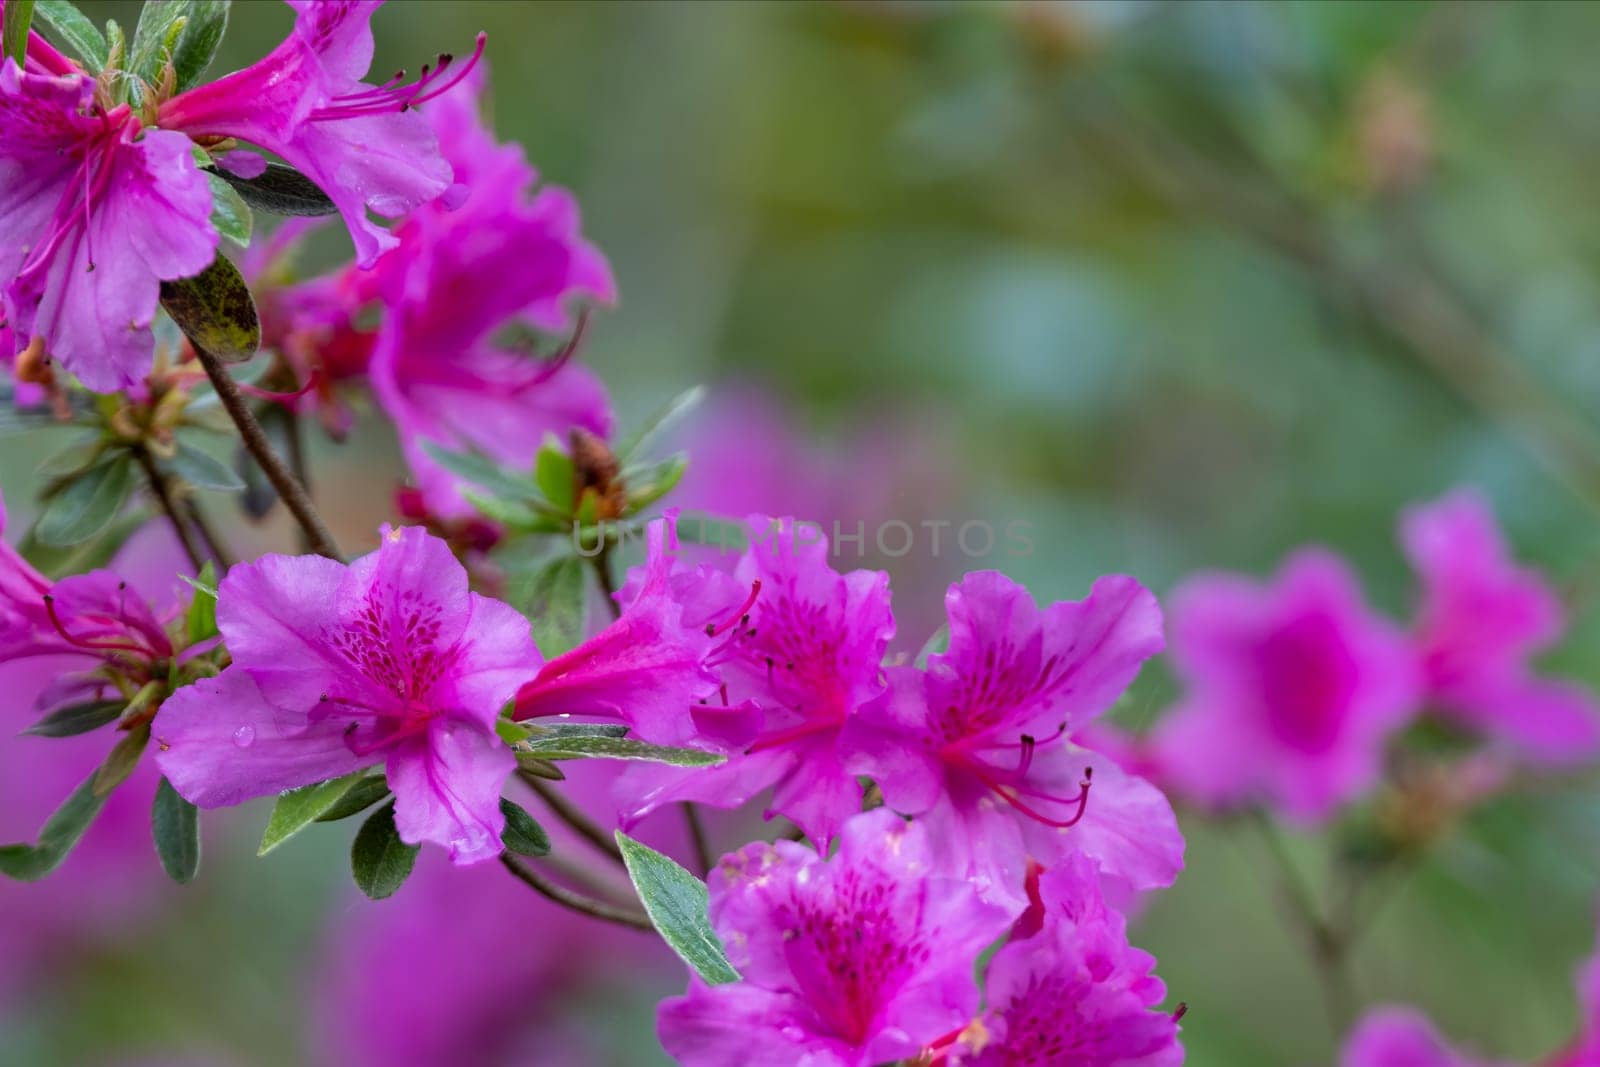 Spring flowering tree with bright pink blossoms with shallow depth of field, background blur green background. High quality photo